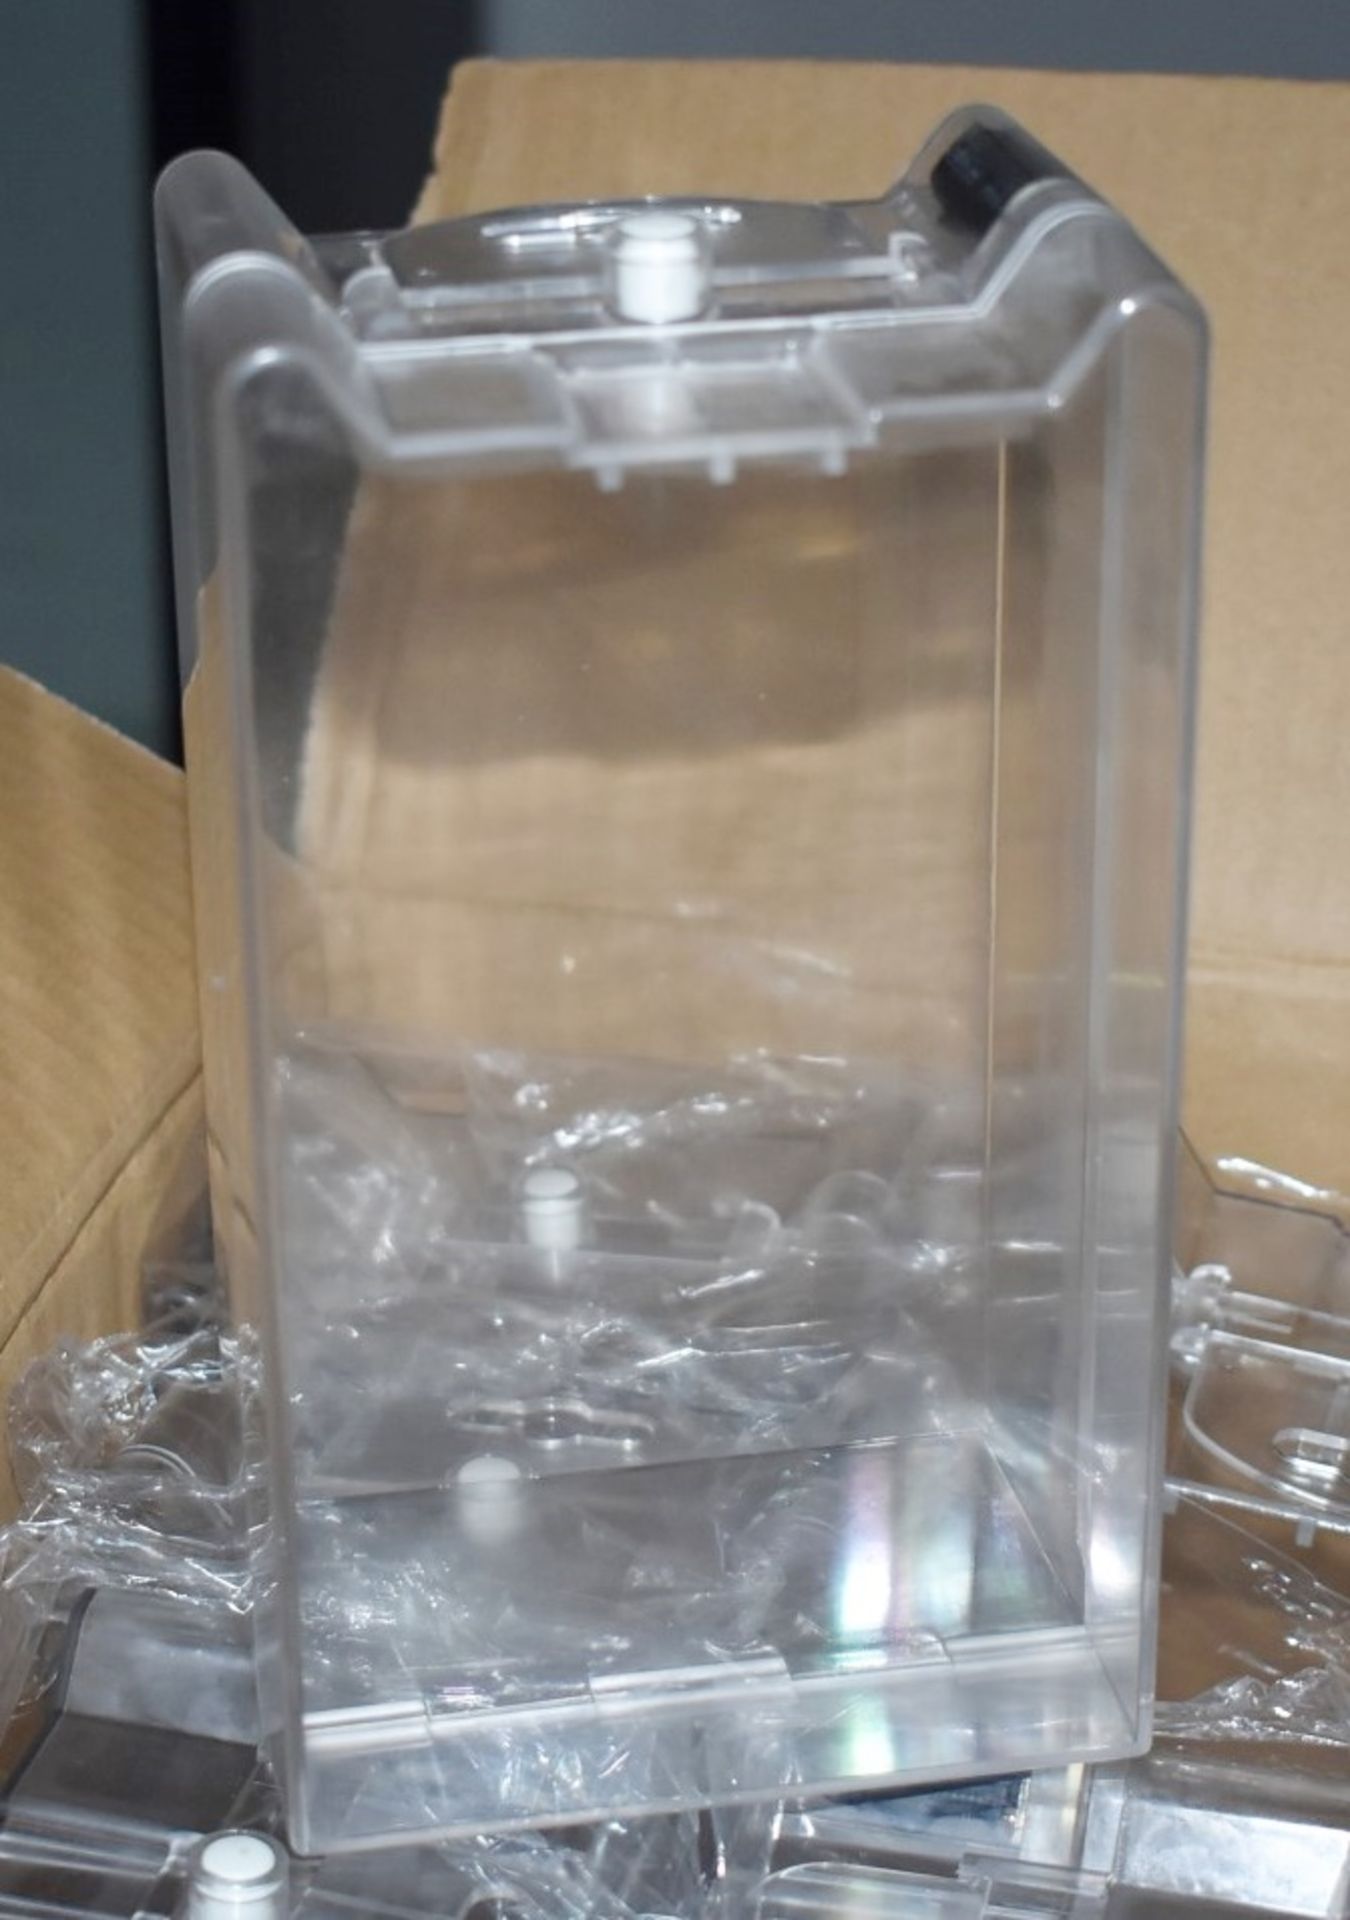 80 x Catalyst Clear Acrylic Retail Security Safer Cases With RF Tags and Hanging Tags - Brand New - Image 4 of 9